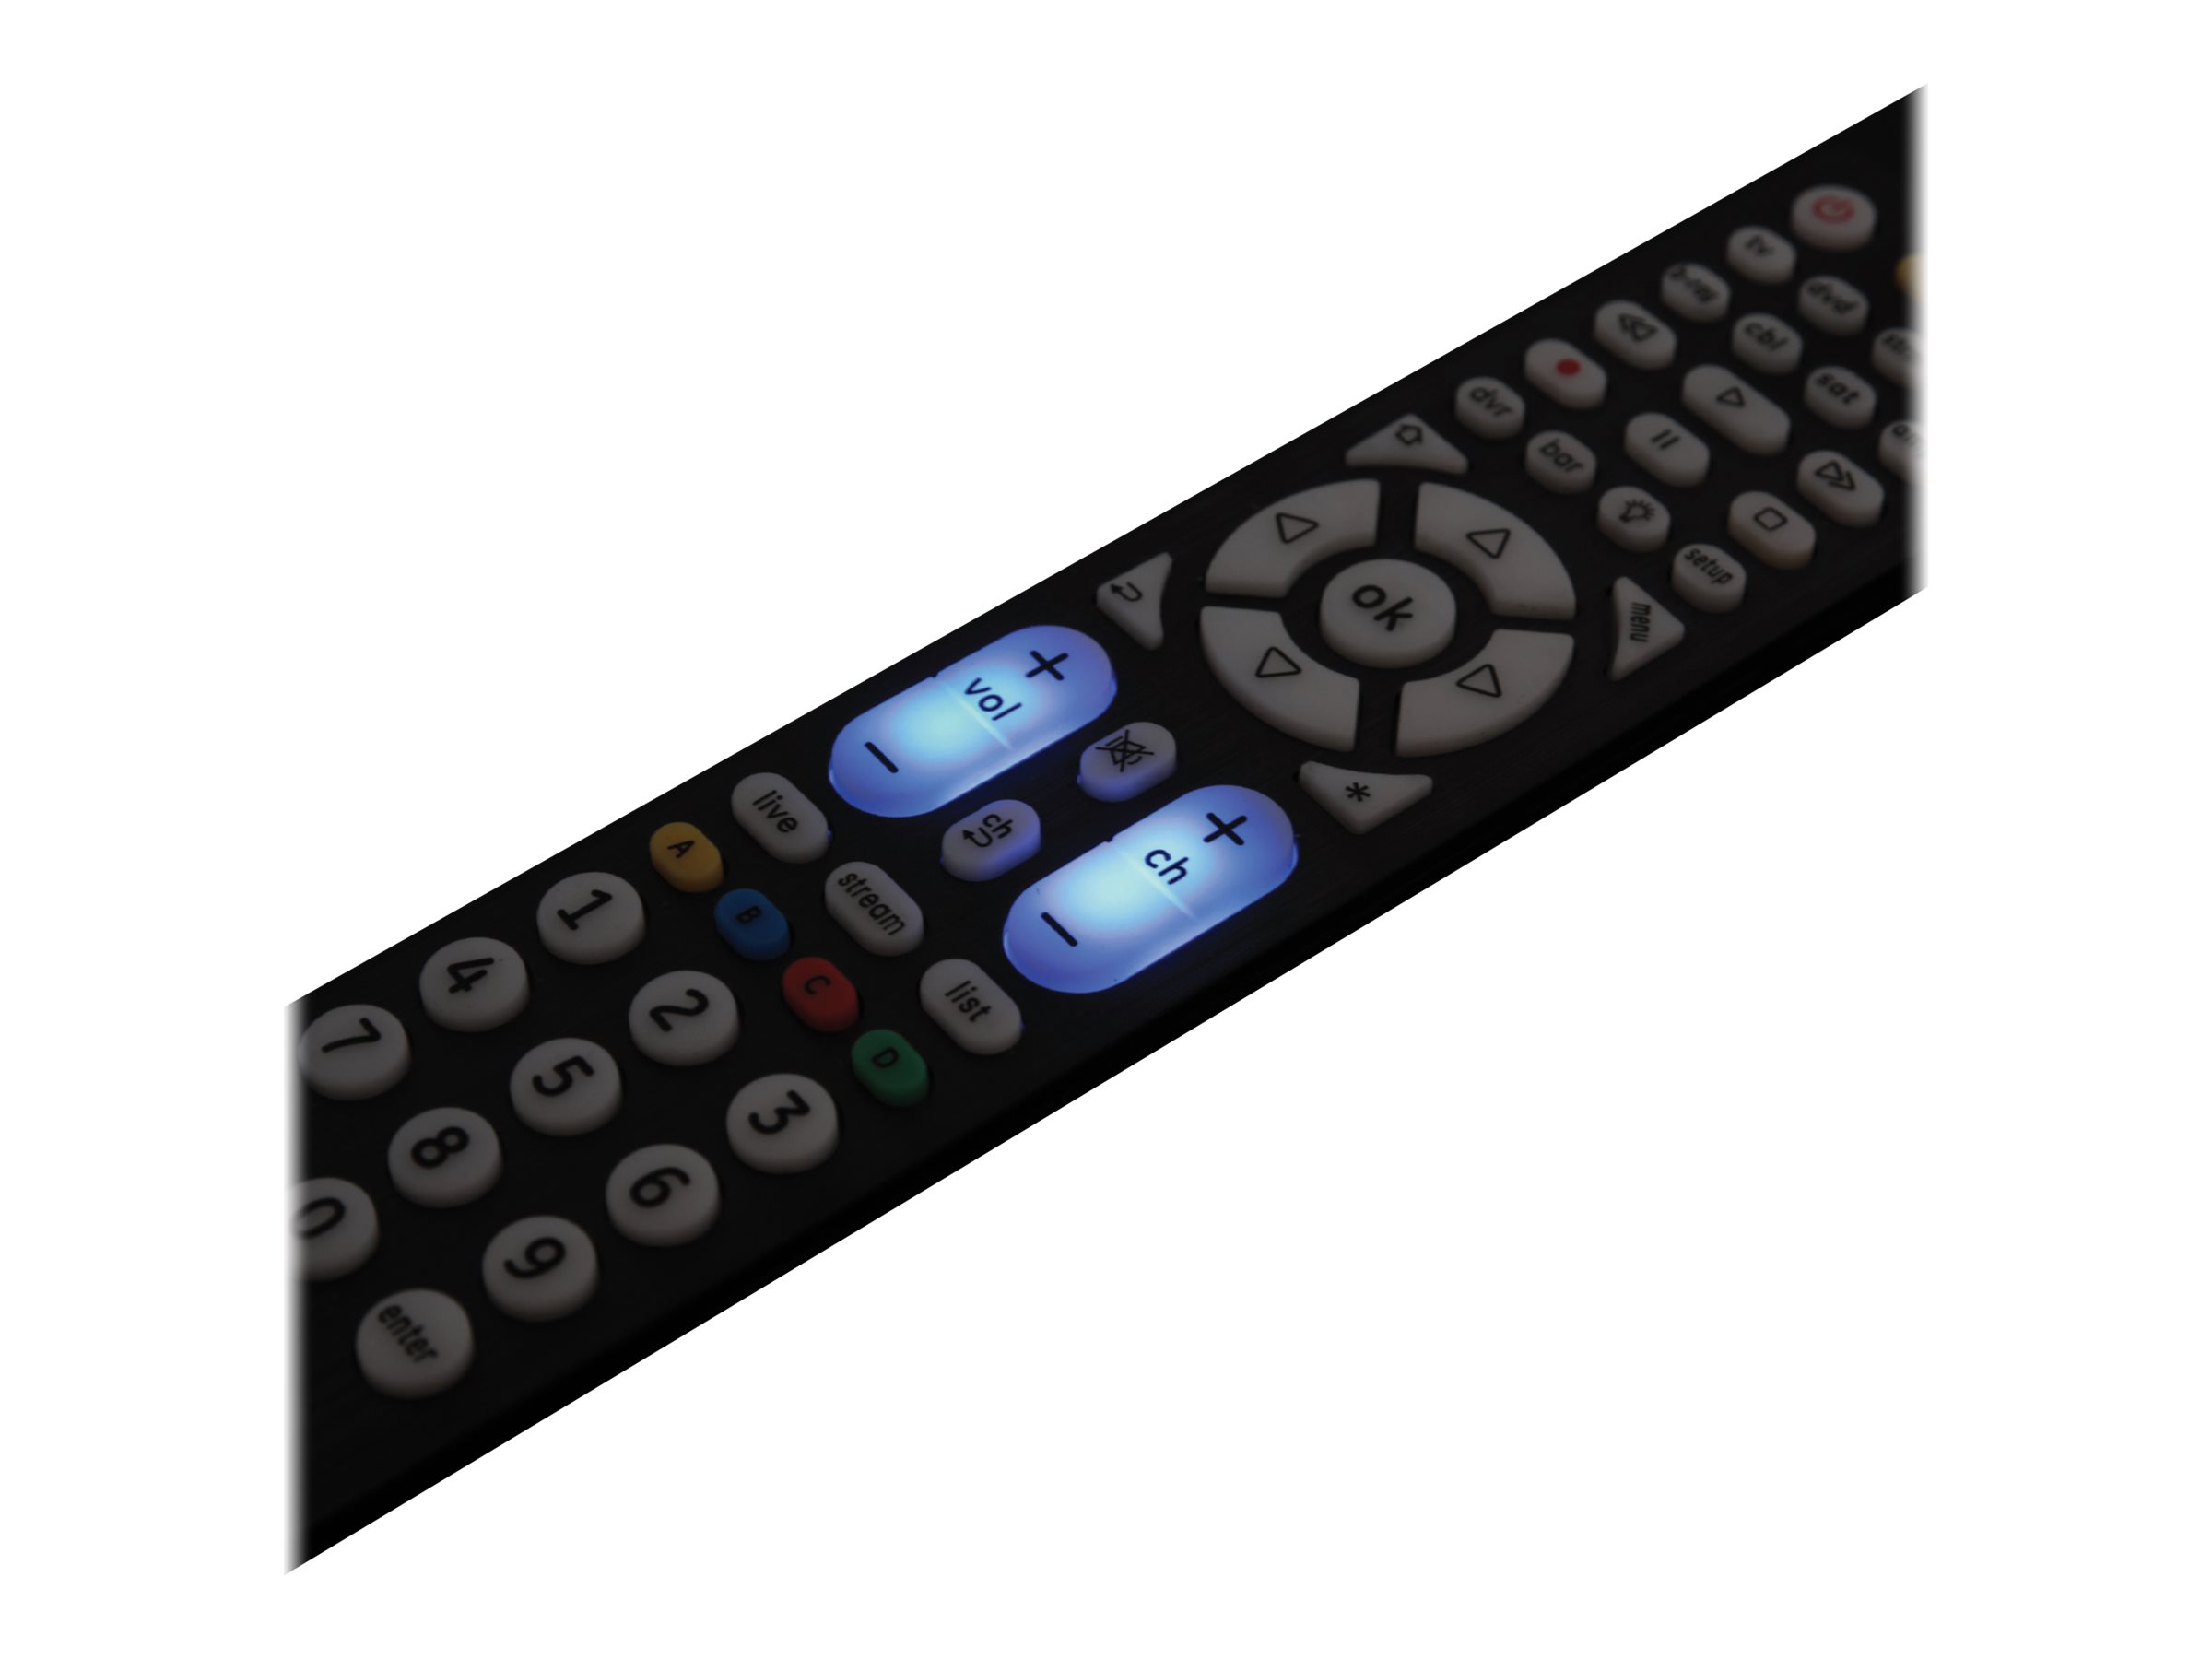 Monster 8-in-1 Universal Remote Control - MHX11008CAN